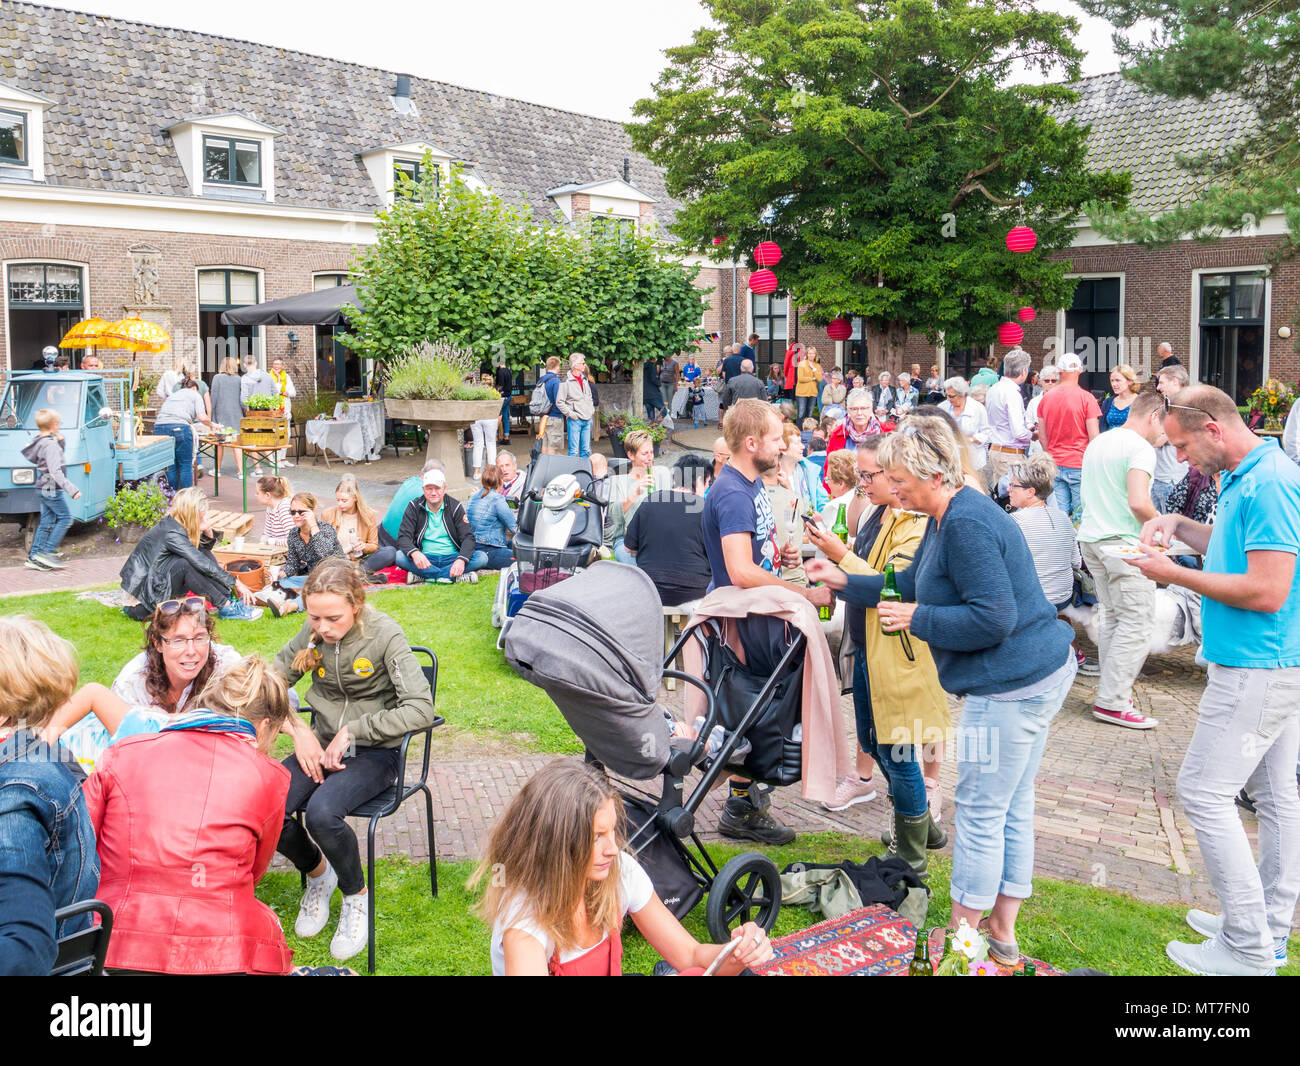 People enjoying snacks and drinks on street food festival in garden of old orphanage in historic town of Bolsward, Friesland, Netherlands Stock Photo